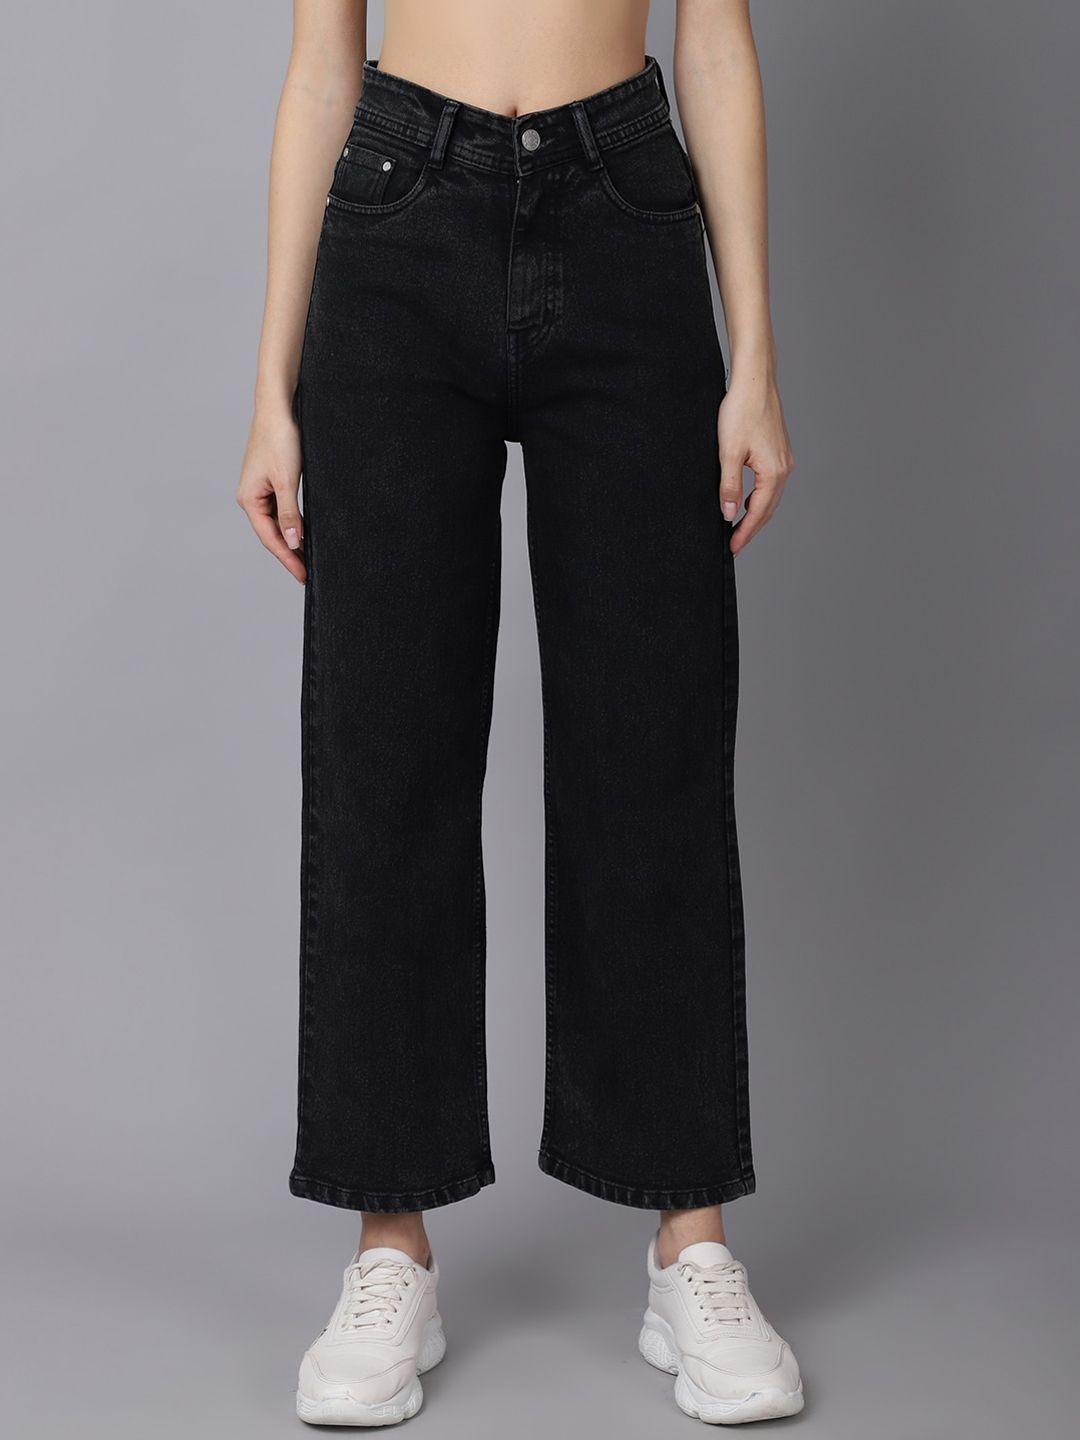 River Of Design Jeans Women Charcoal Wide Leg High-Rise Jeans Price in India